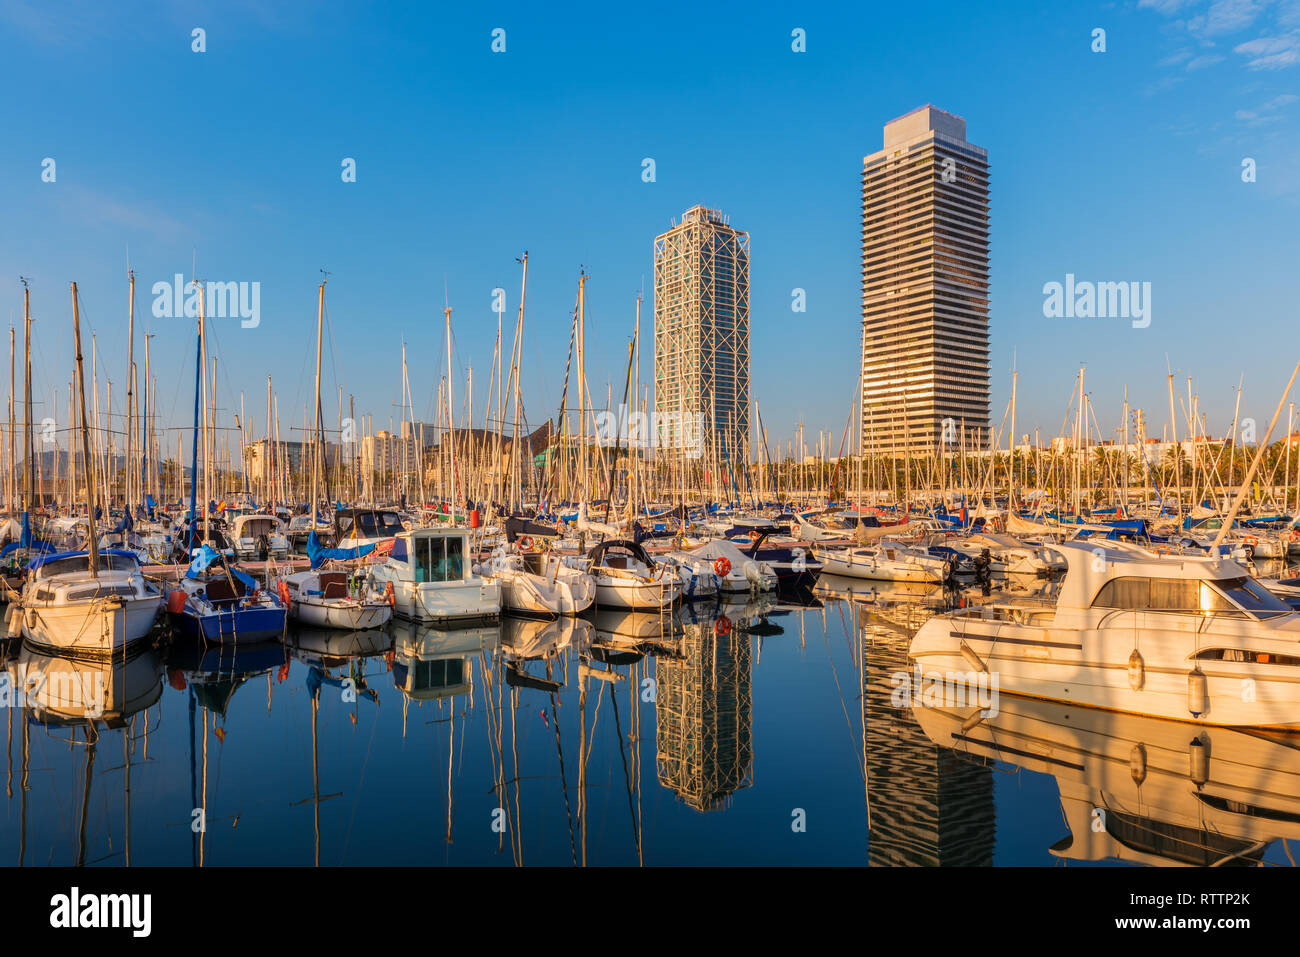 Marina in Port Olimpic, Barcelona, Spain. The harbour hosted the sailing events for the 1992 Summer Olympics. The venue was opened in 1991. Stock Photo